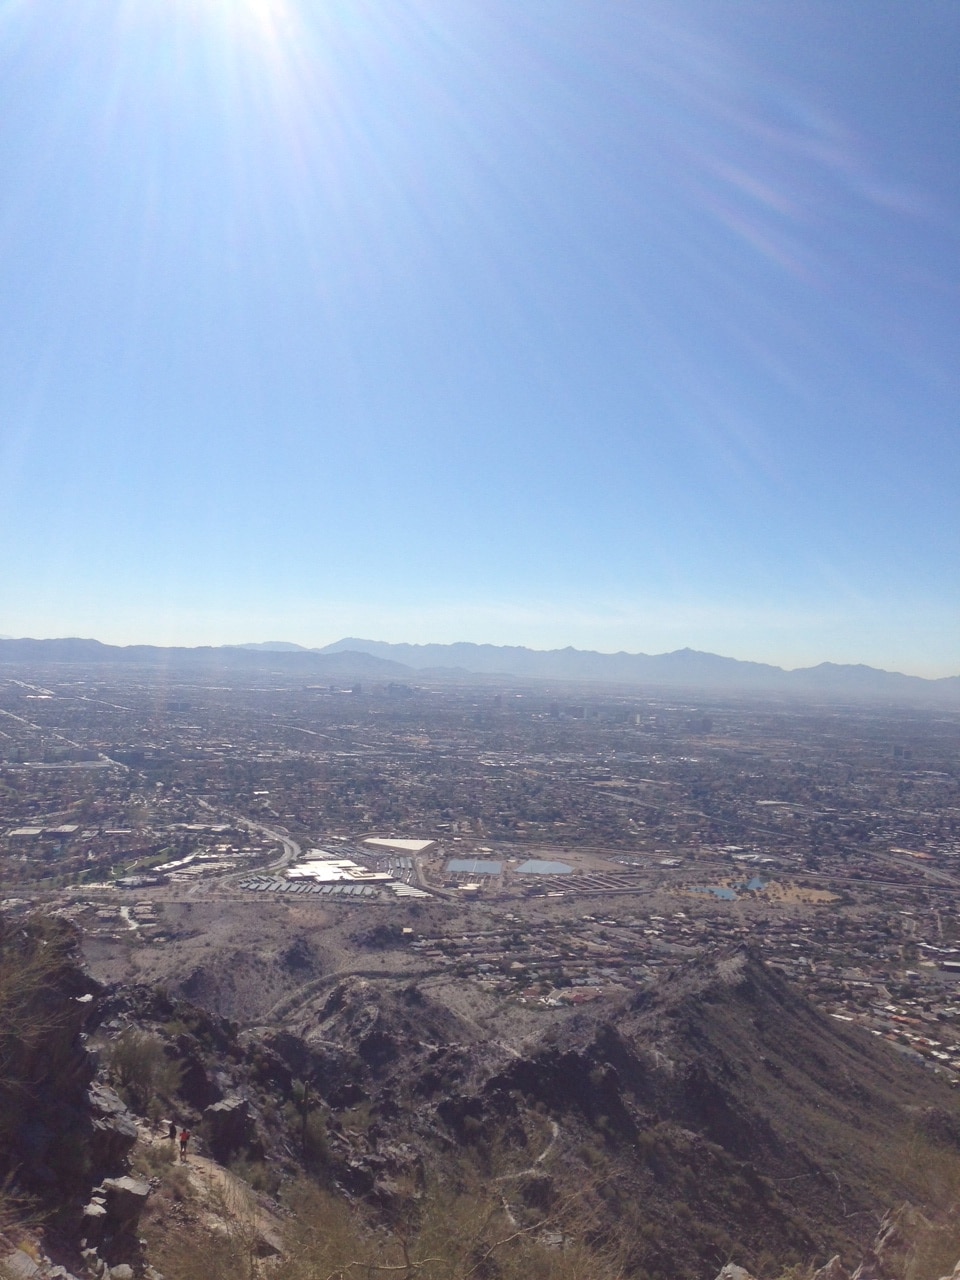 A view from the top of Squaw Peak